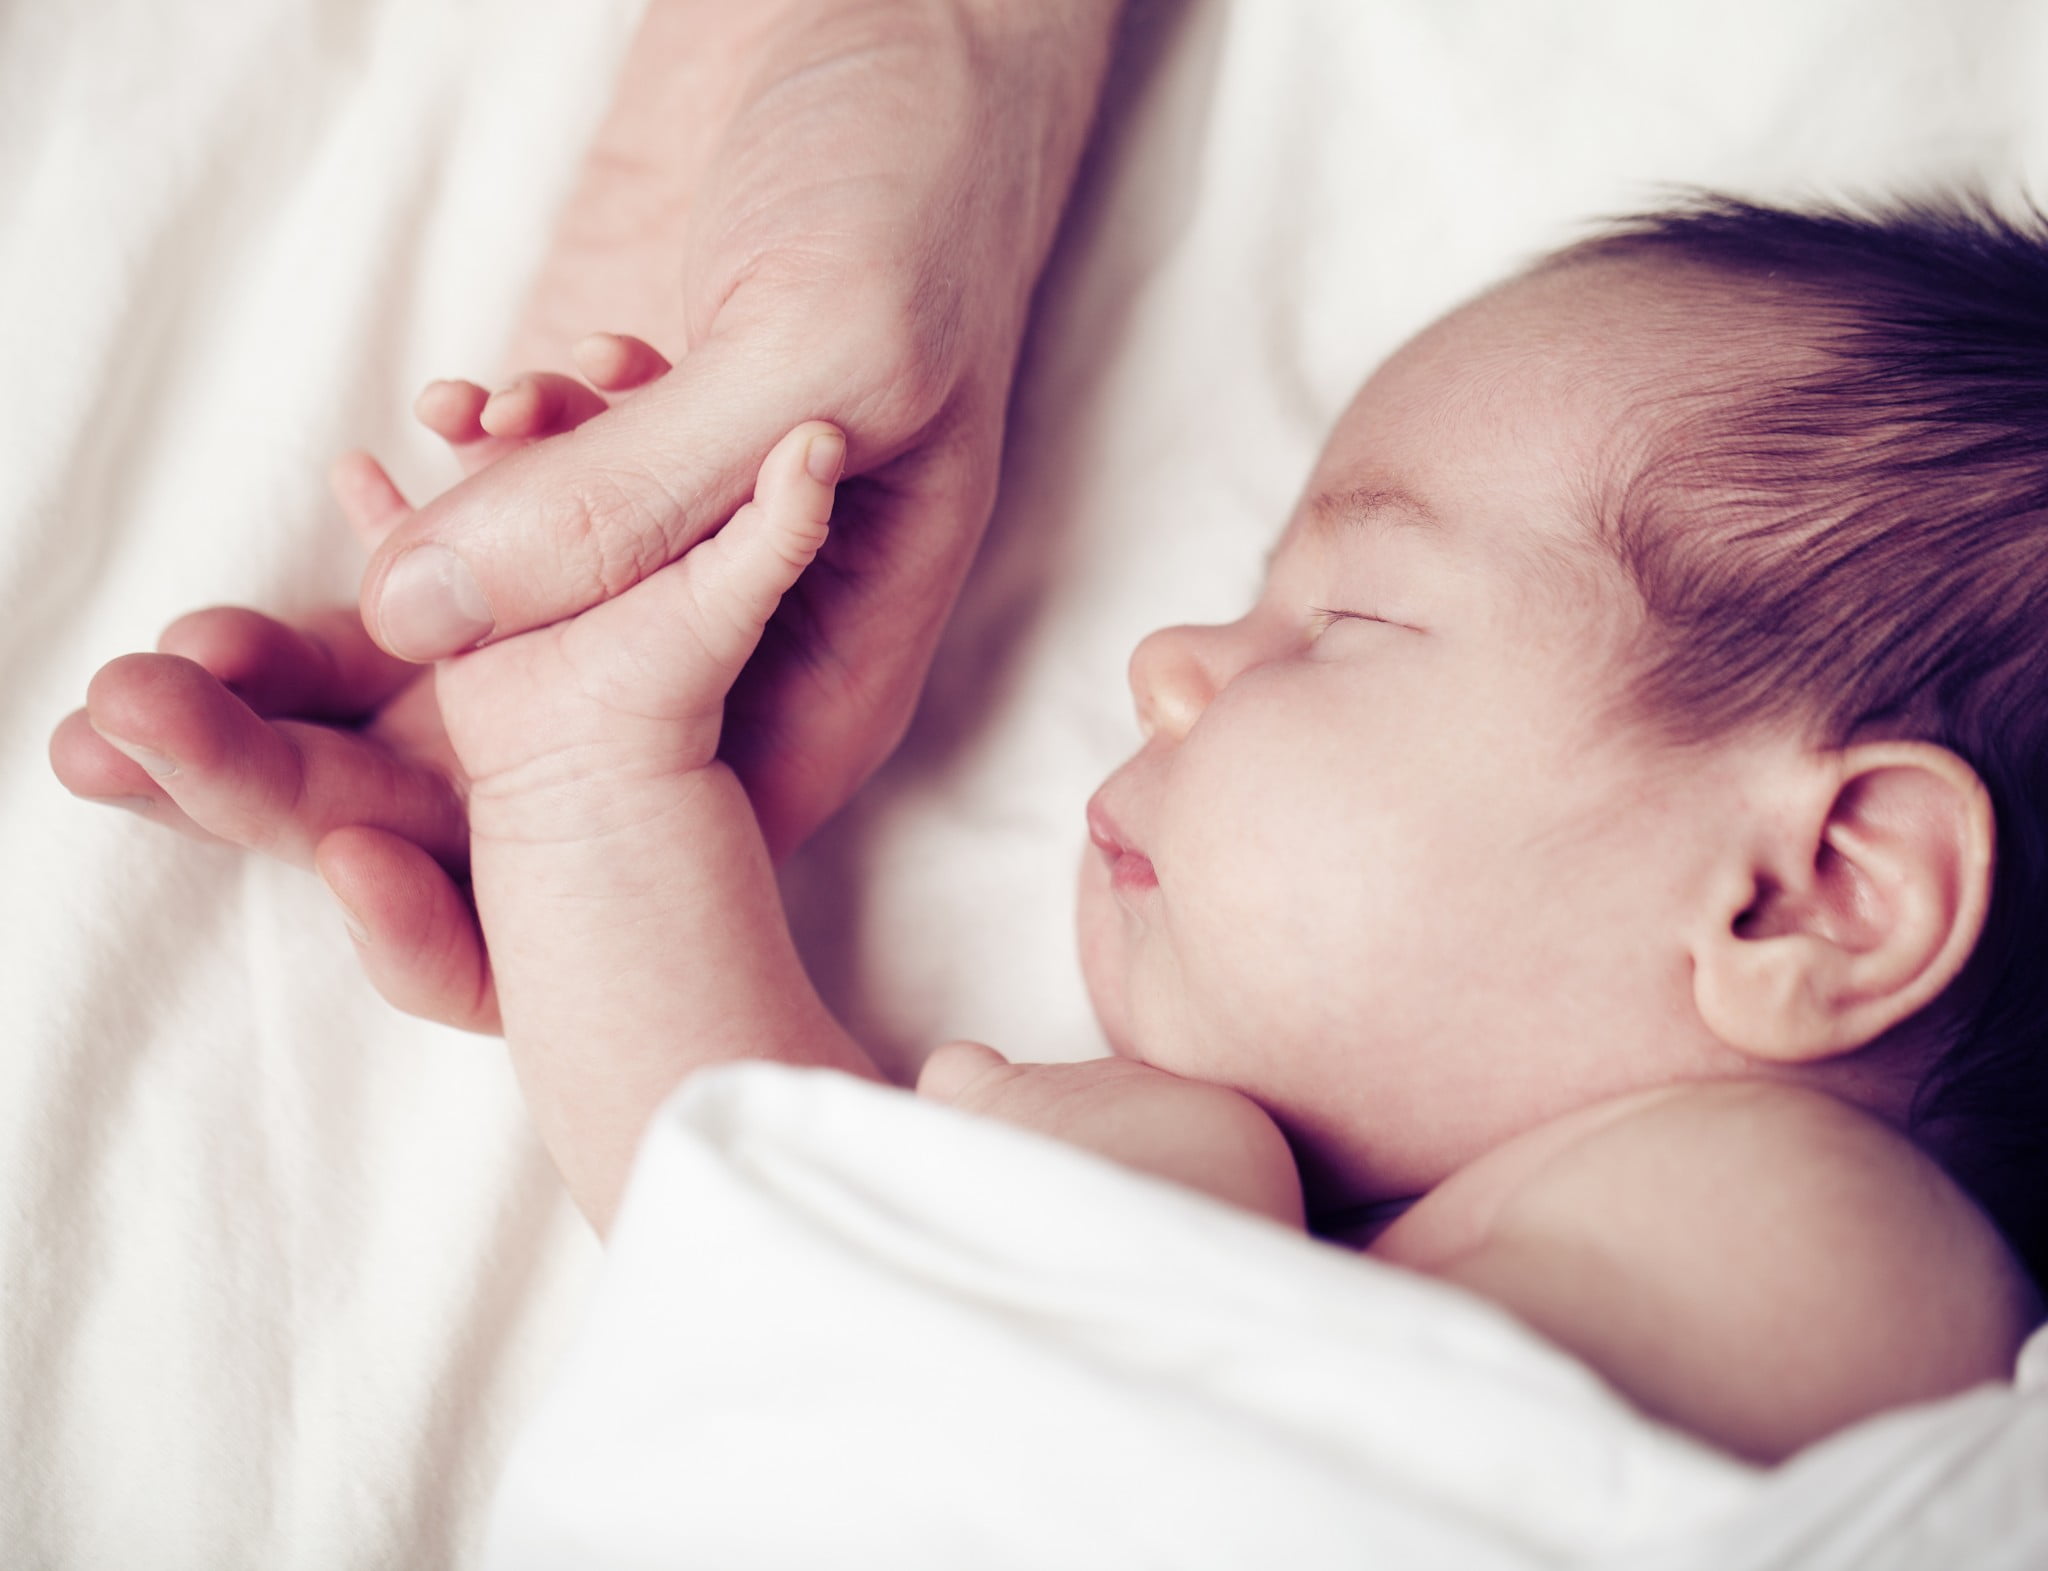 Babies who snore: baby asleep holding father's hand